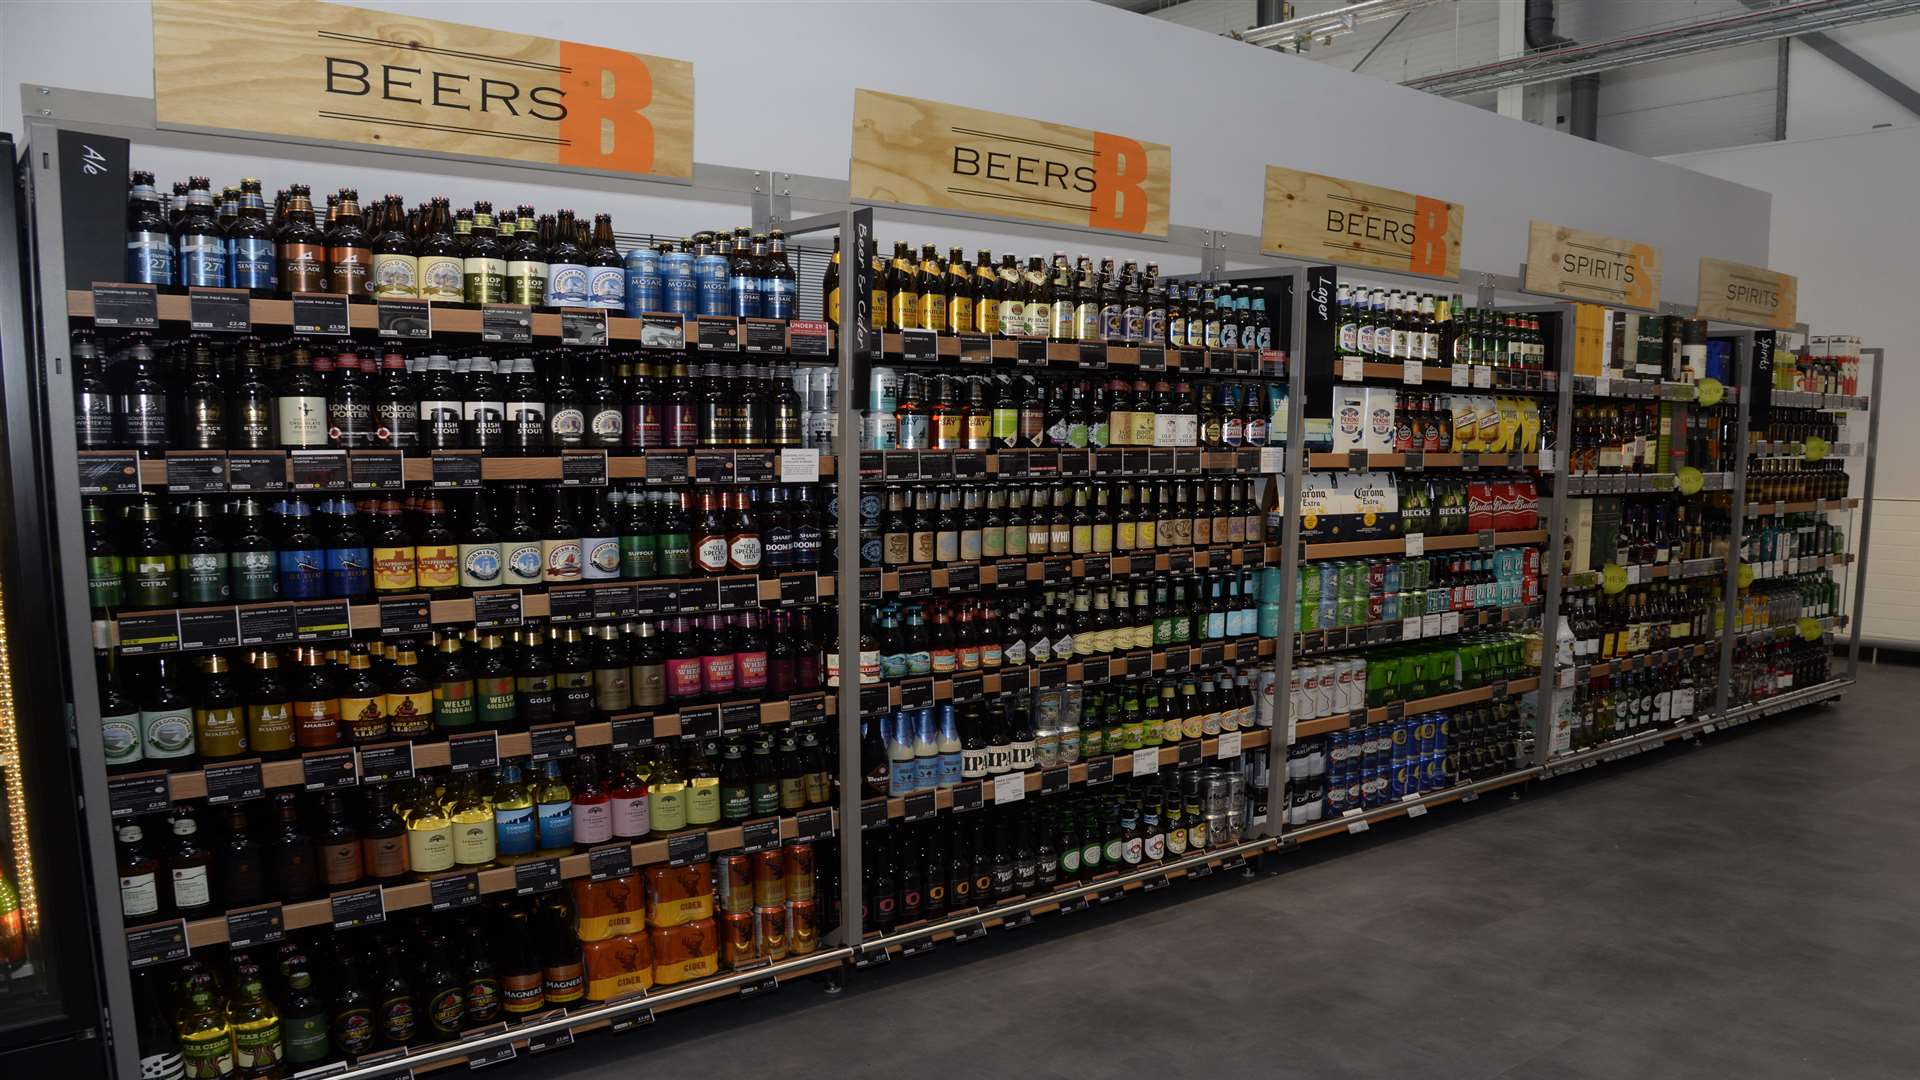 Part of the beers and sprits aisle at the new M&S Foodhall on the Sittingbourne Retail Park, Mill Way.